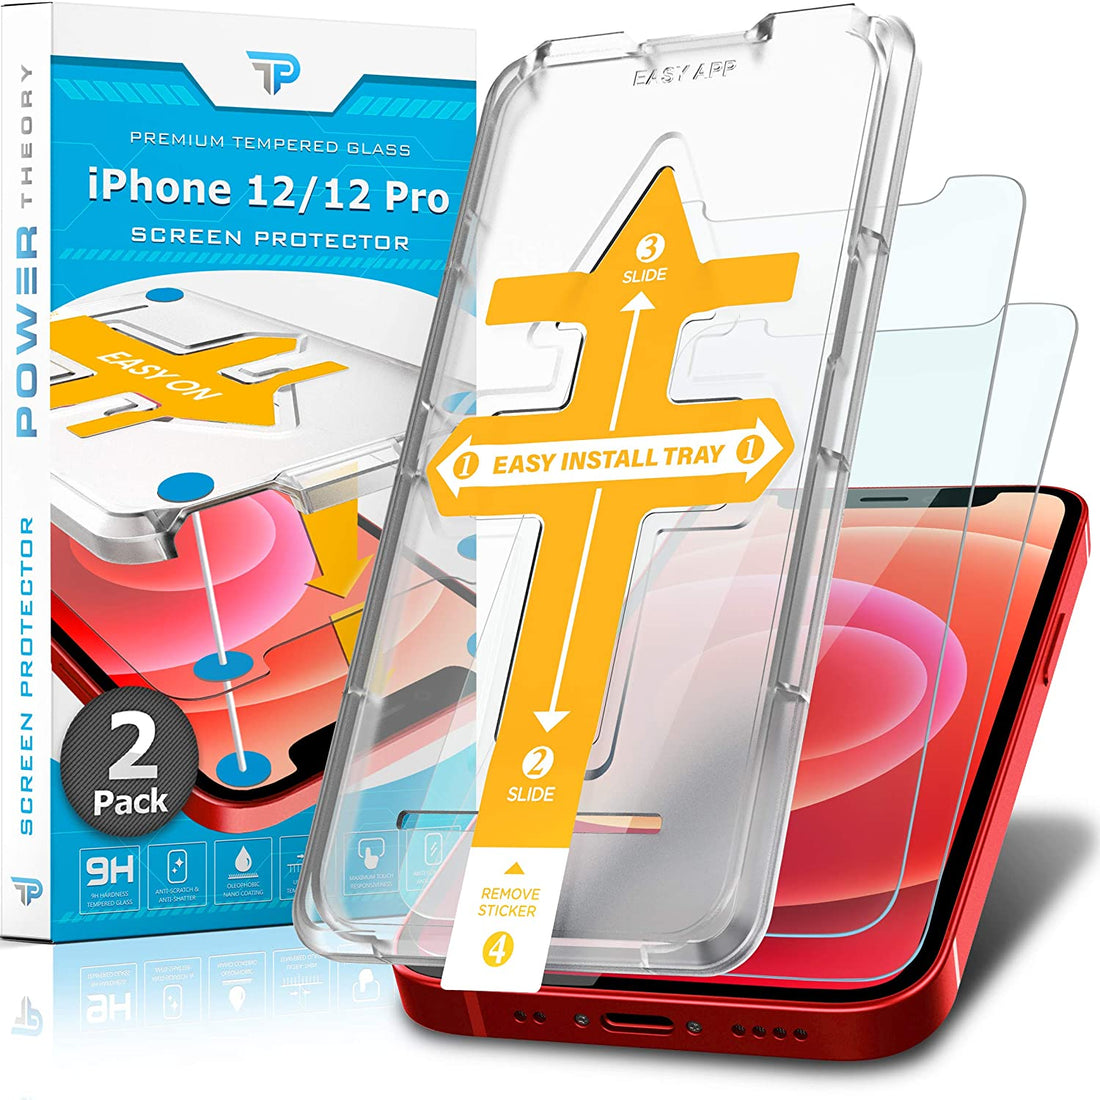 Apple iPhone 12 & 12 Pro Screen Protector Tempered Glass